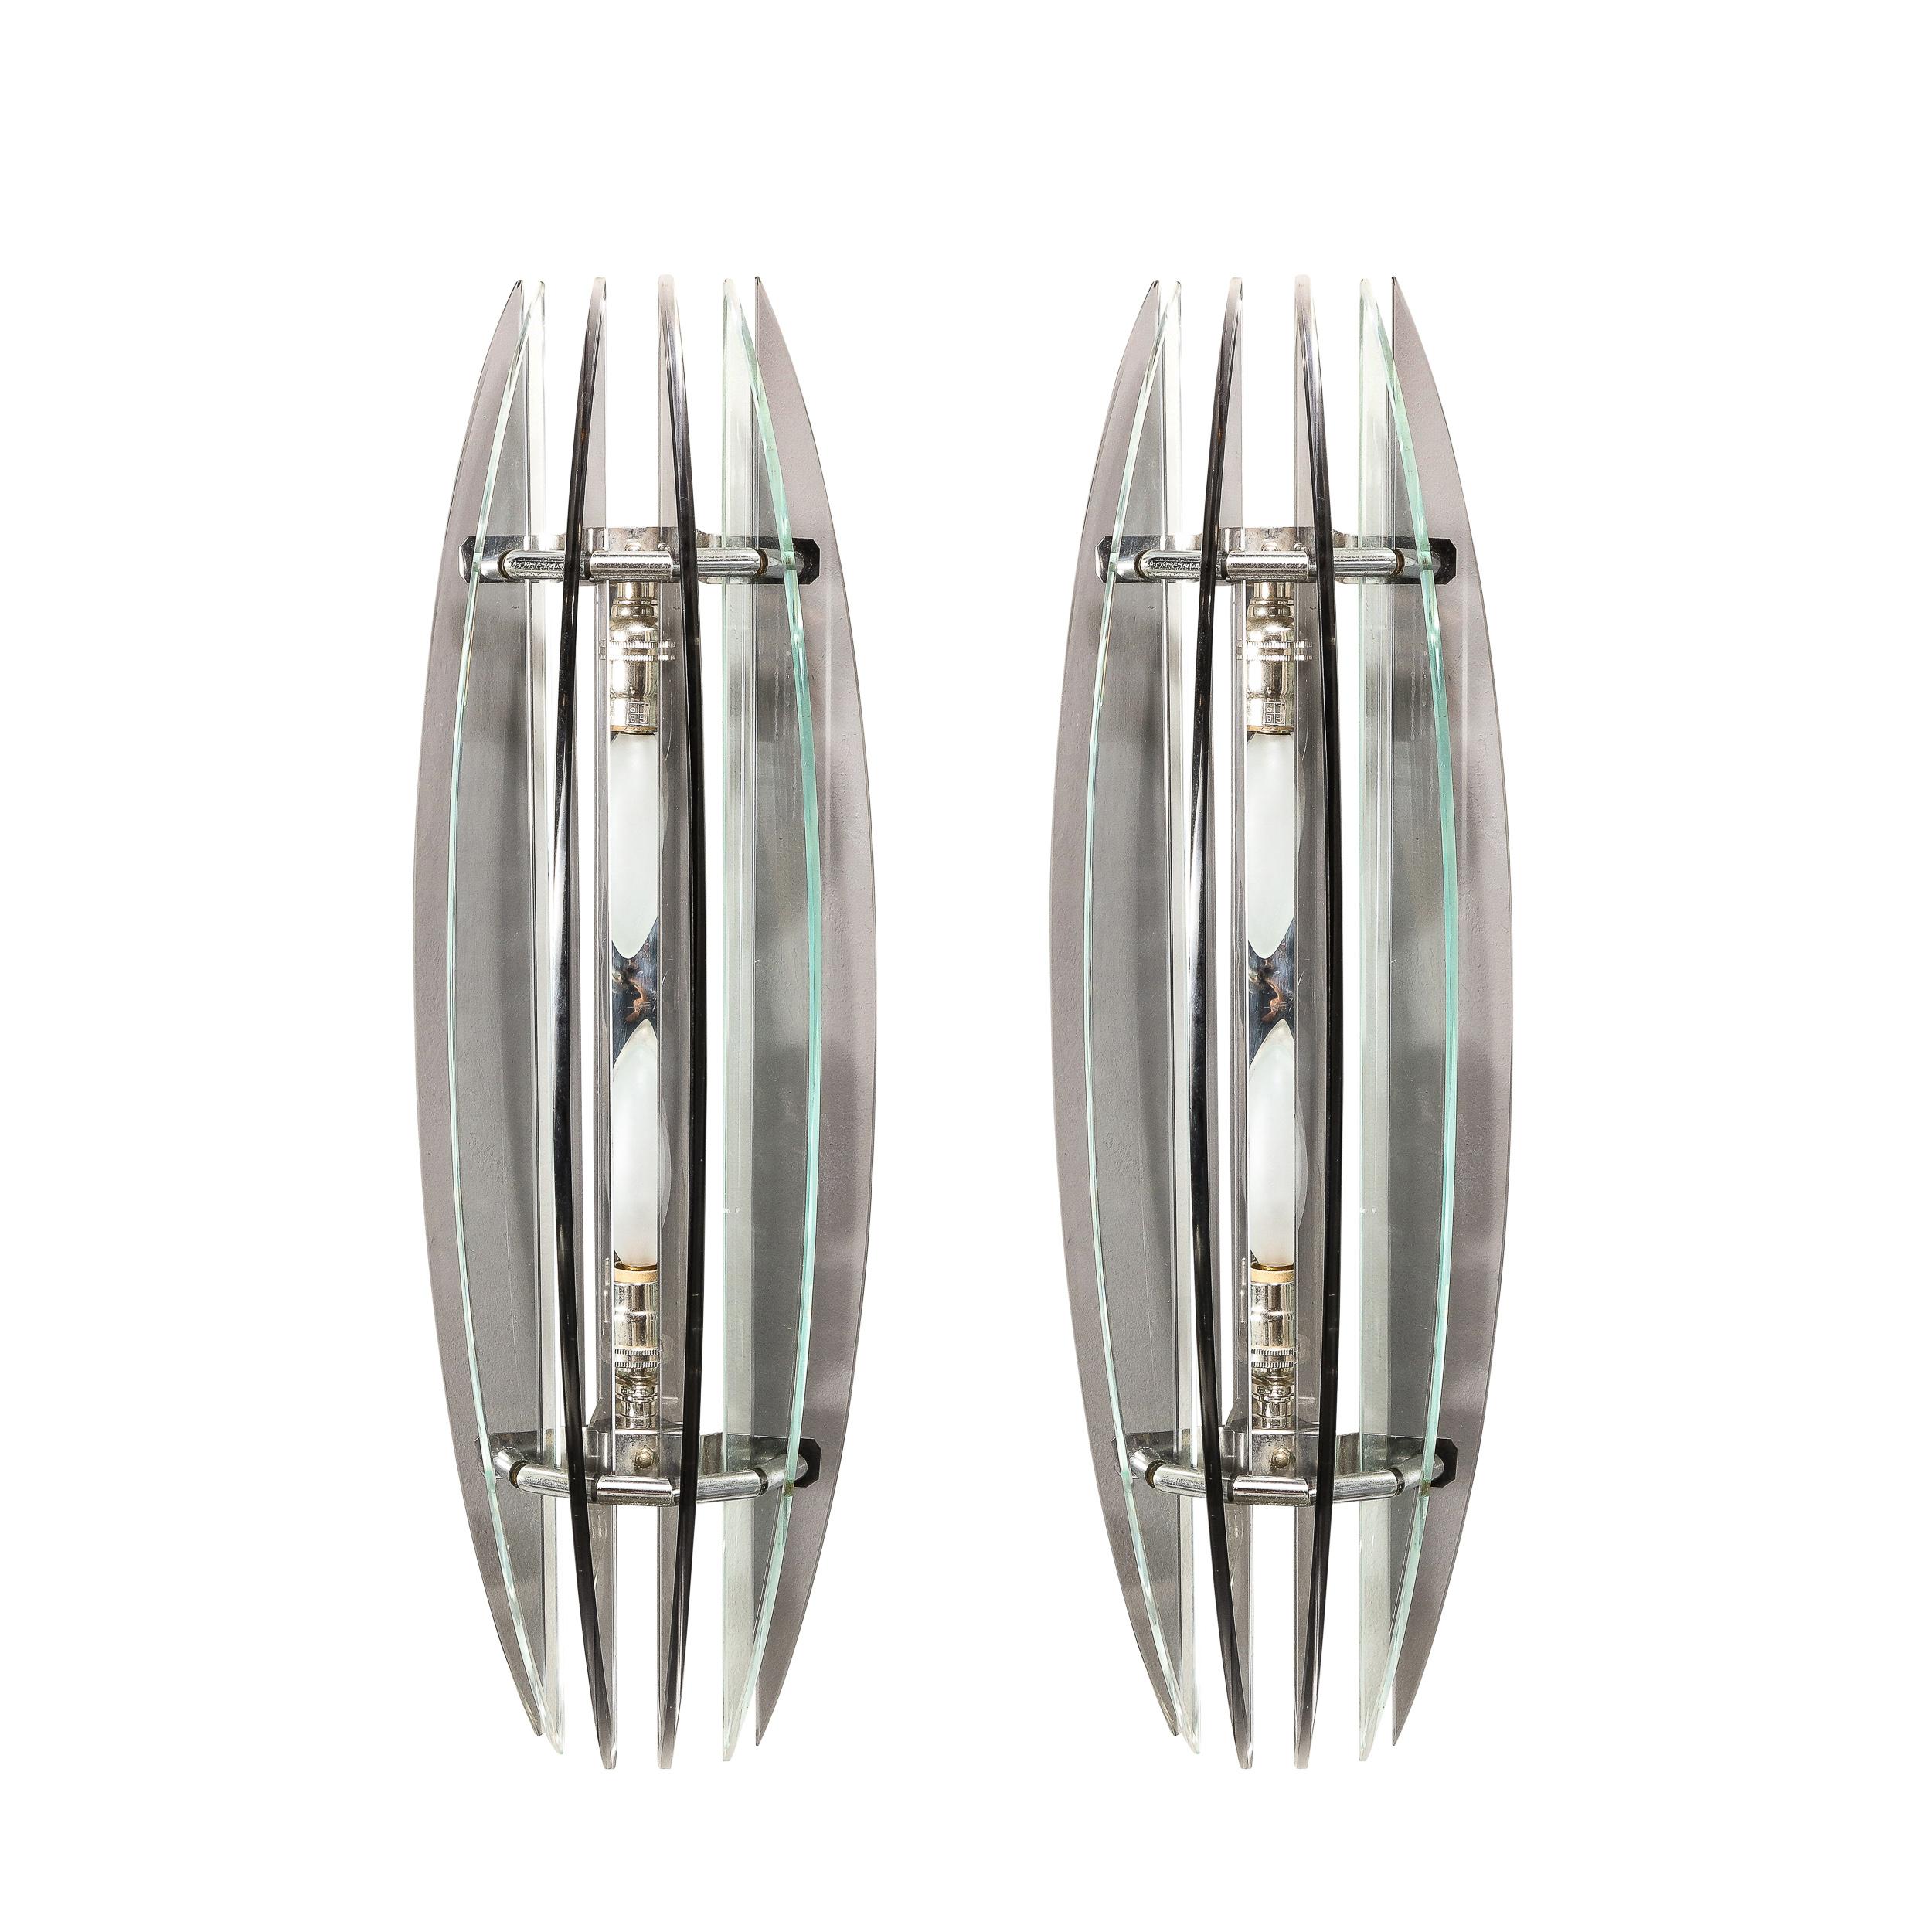 Pair of Mid-Century Modernist Curved Smoked Glass & Chrome Sconces by Veca For Sale